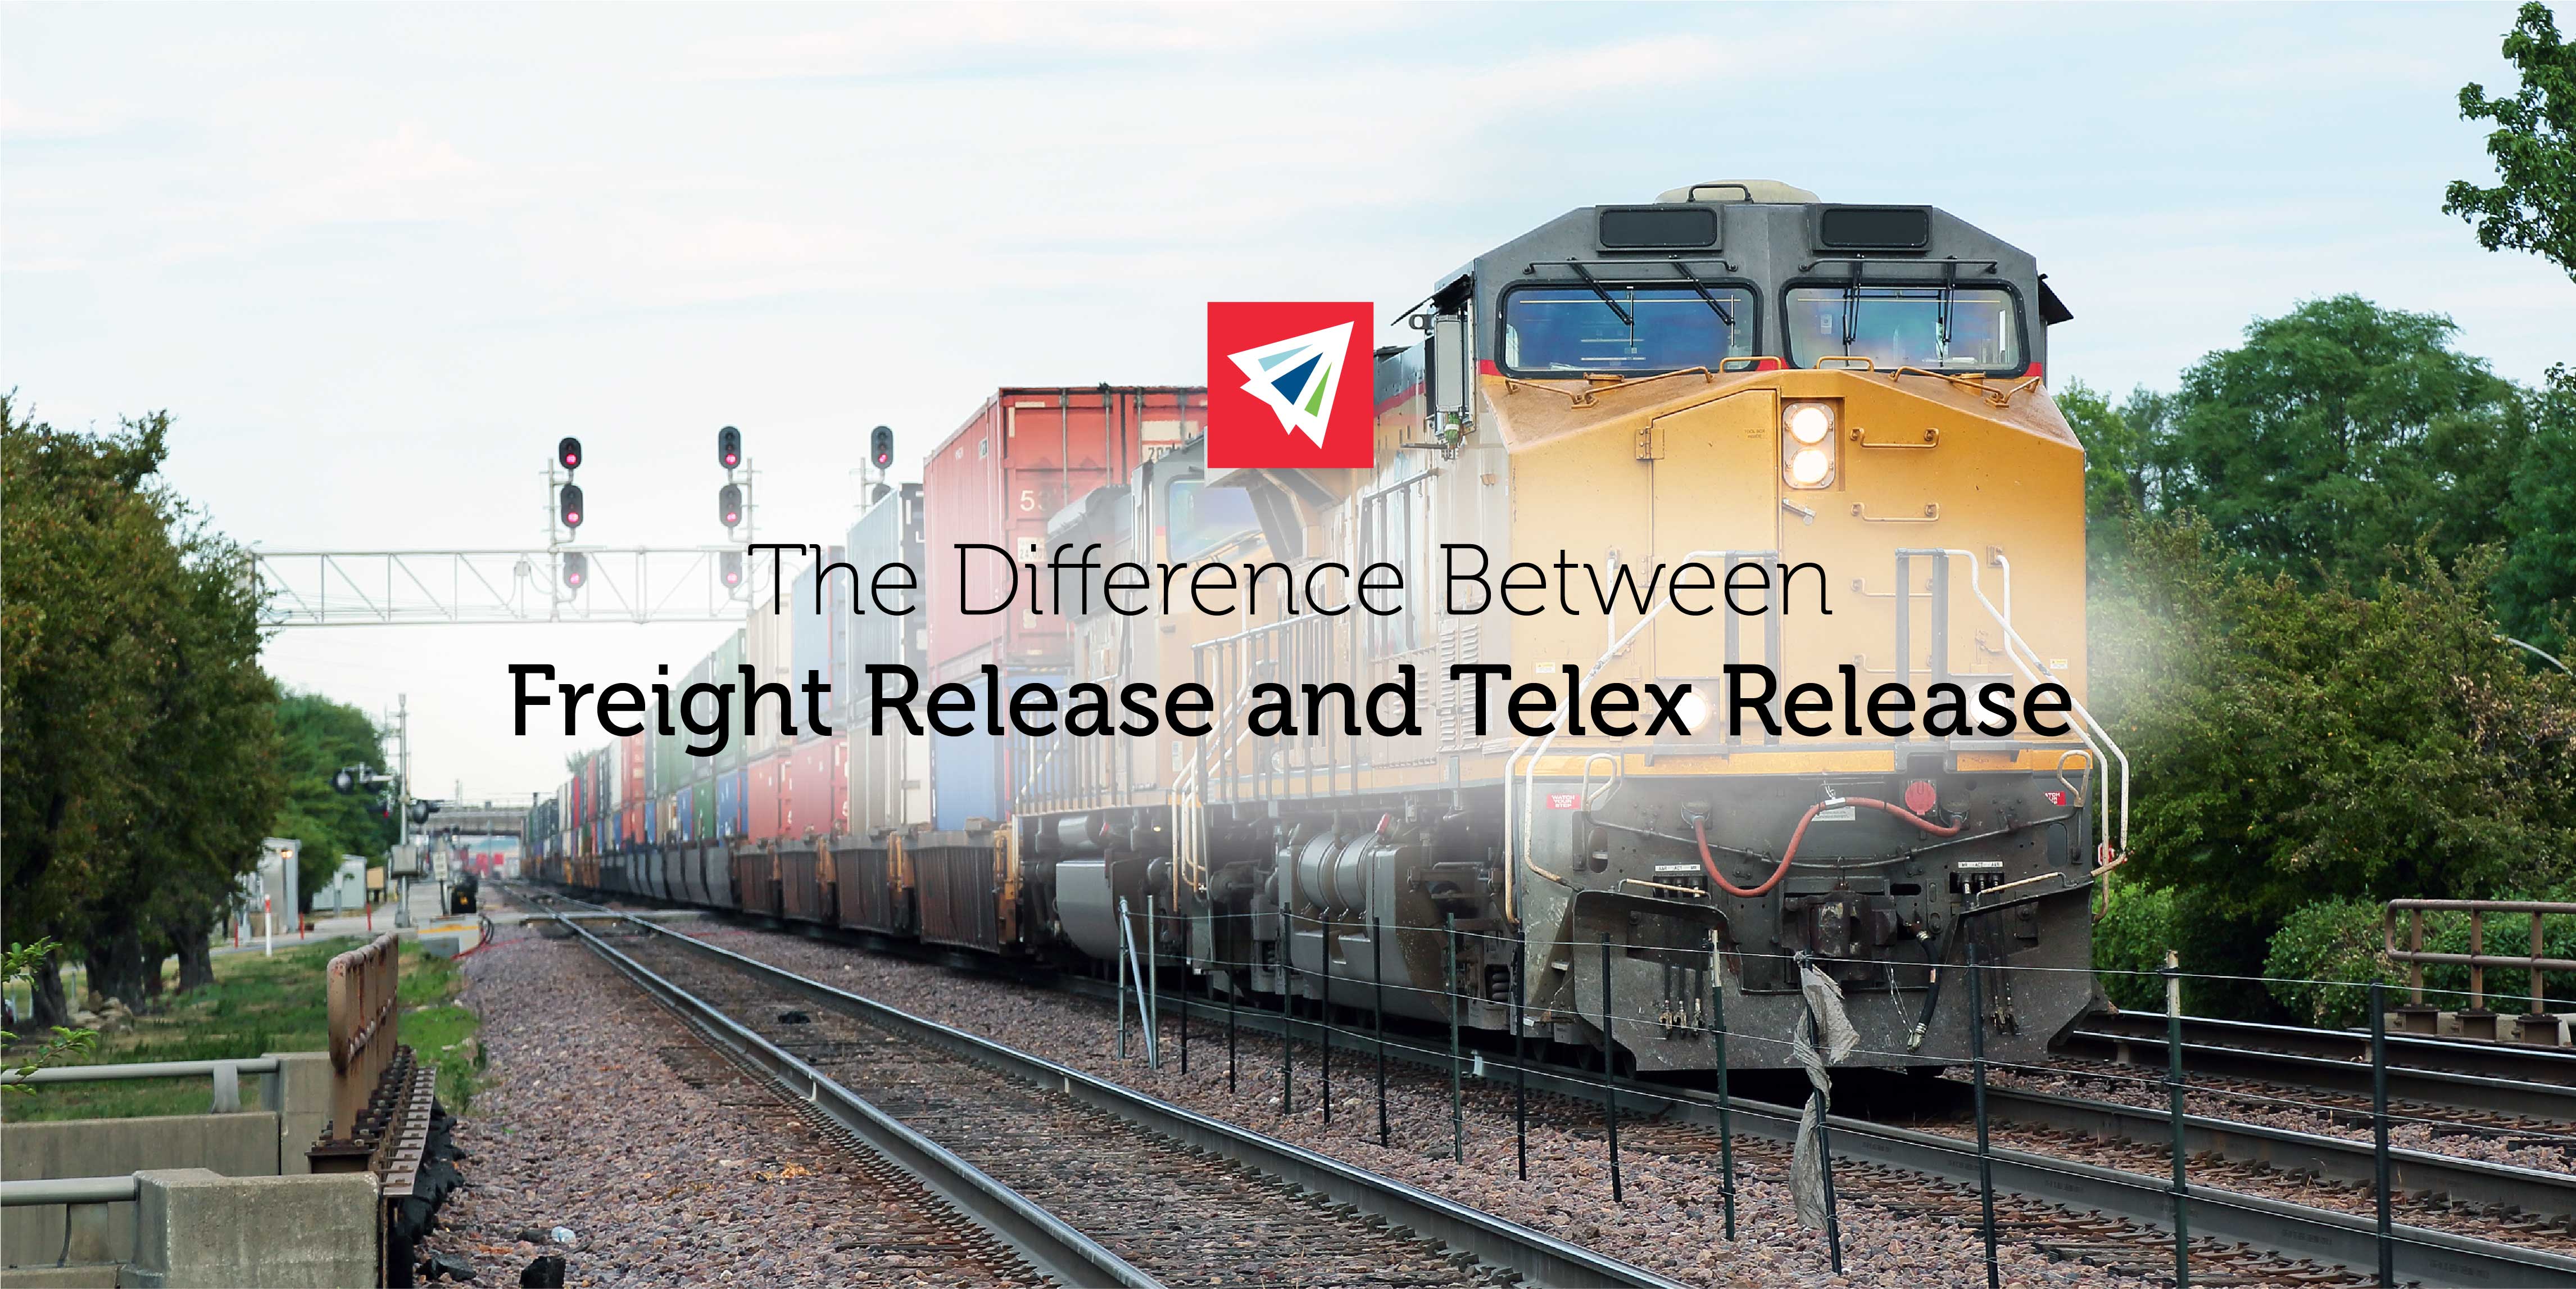 Difference Between Freight Release and Telex Release